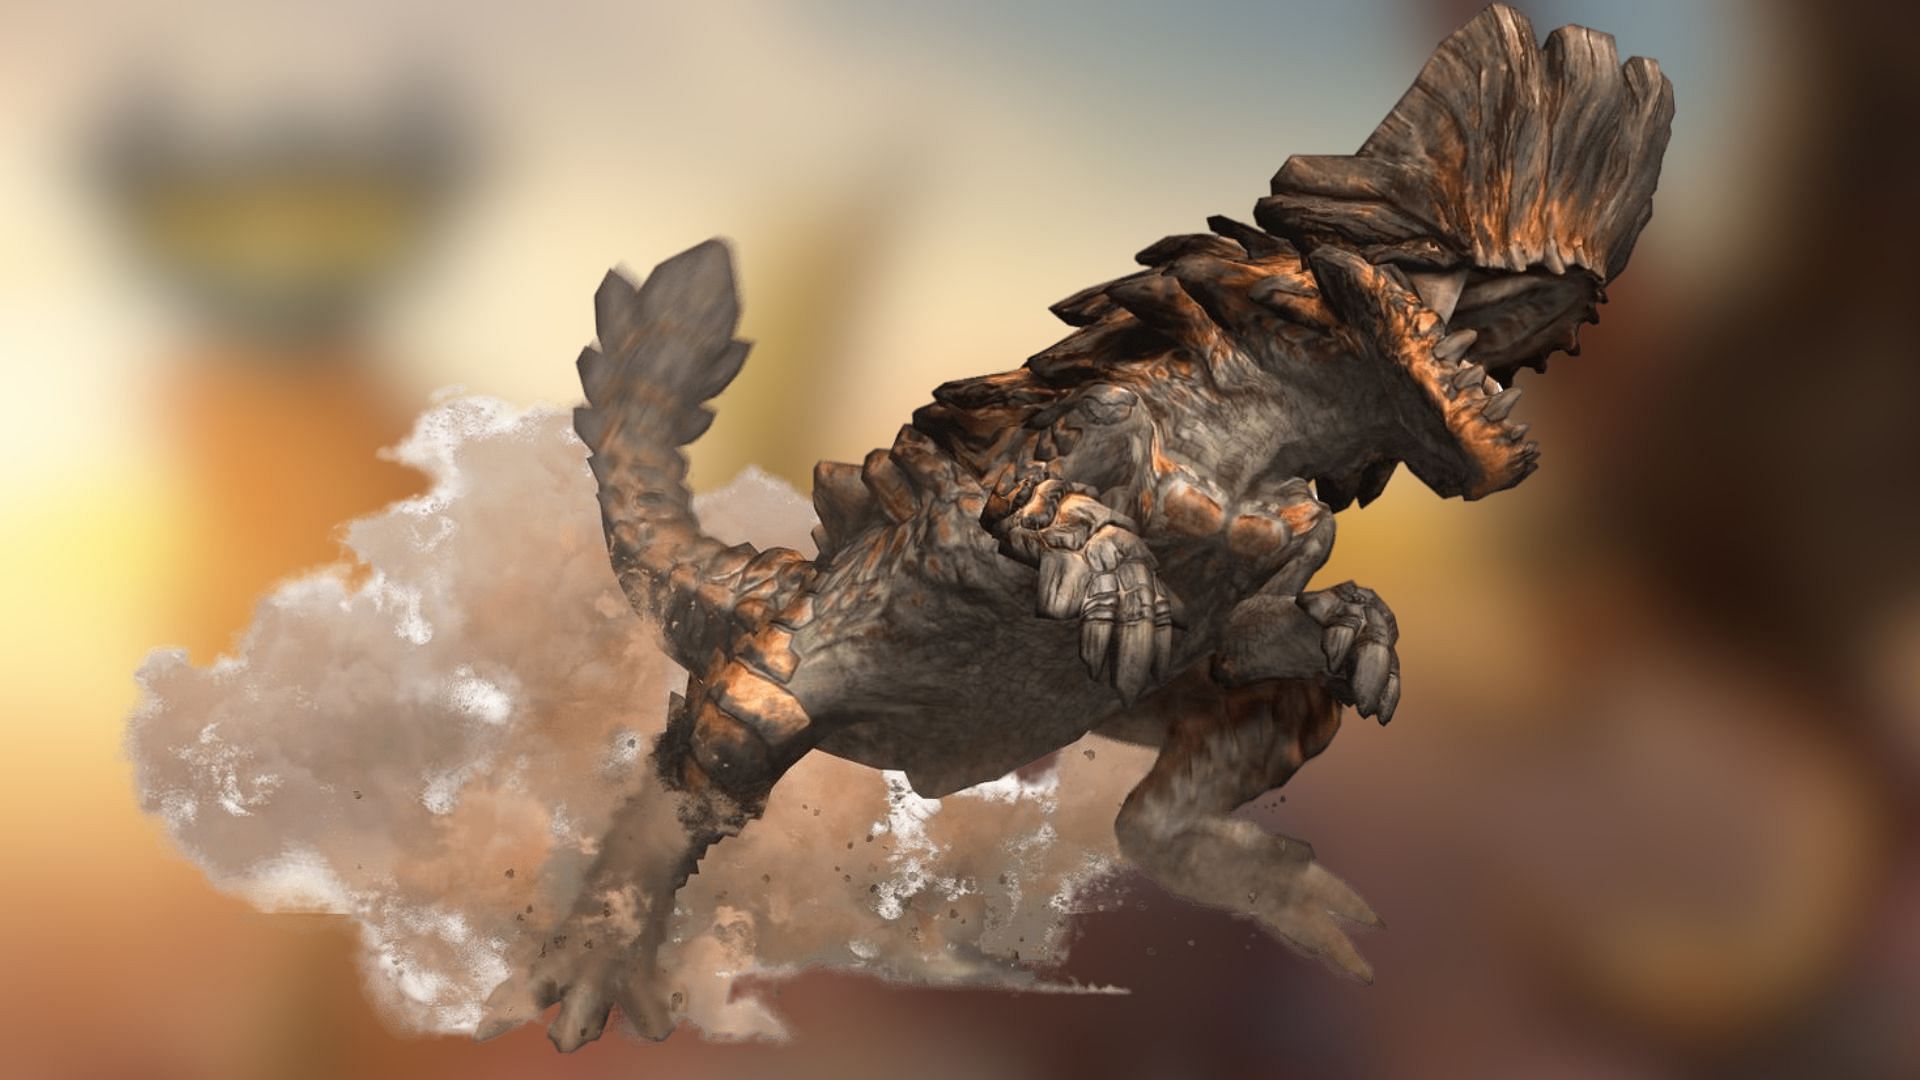 Monster Hunter World - Diablos strategy, Diablos weakness explained and how  to get Diablos Ridge, Tailcase, Marrow, Fang and Shell